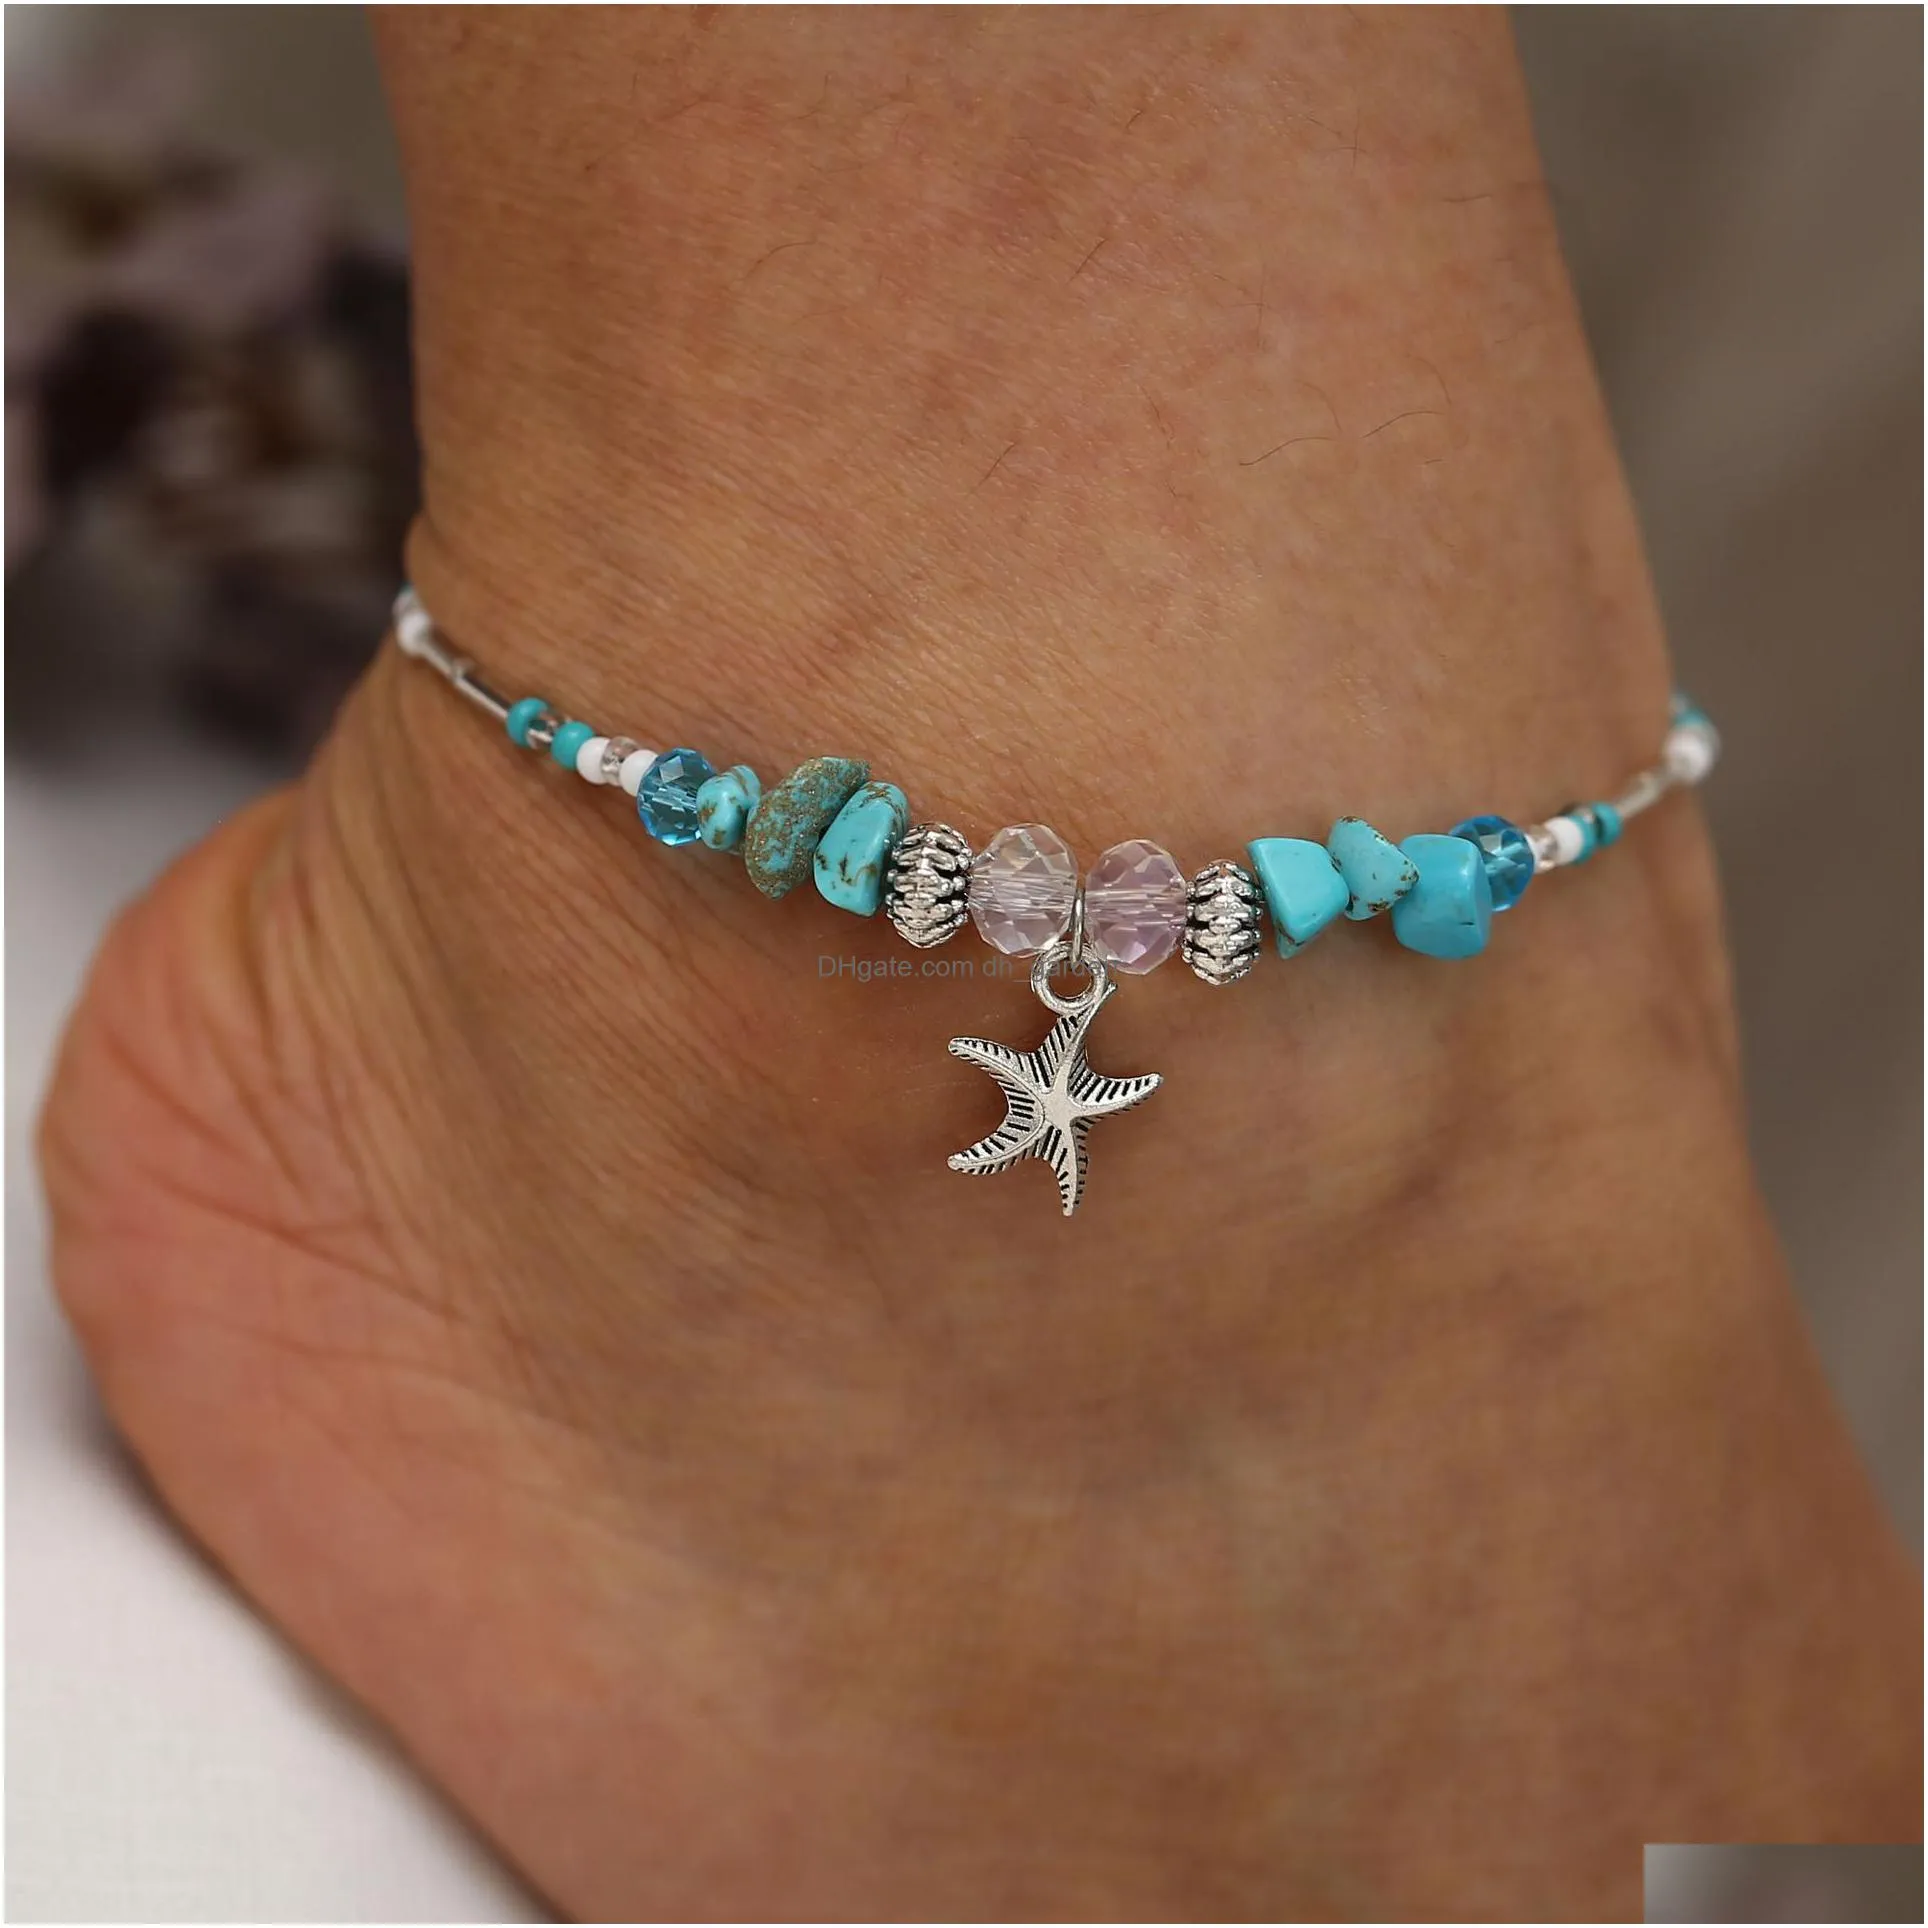 fashion personalized contrast color bead anklets for women barefoot sandals foot anklet bracelet bohemia summer beach charm bead jewelry